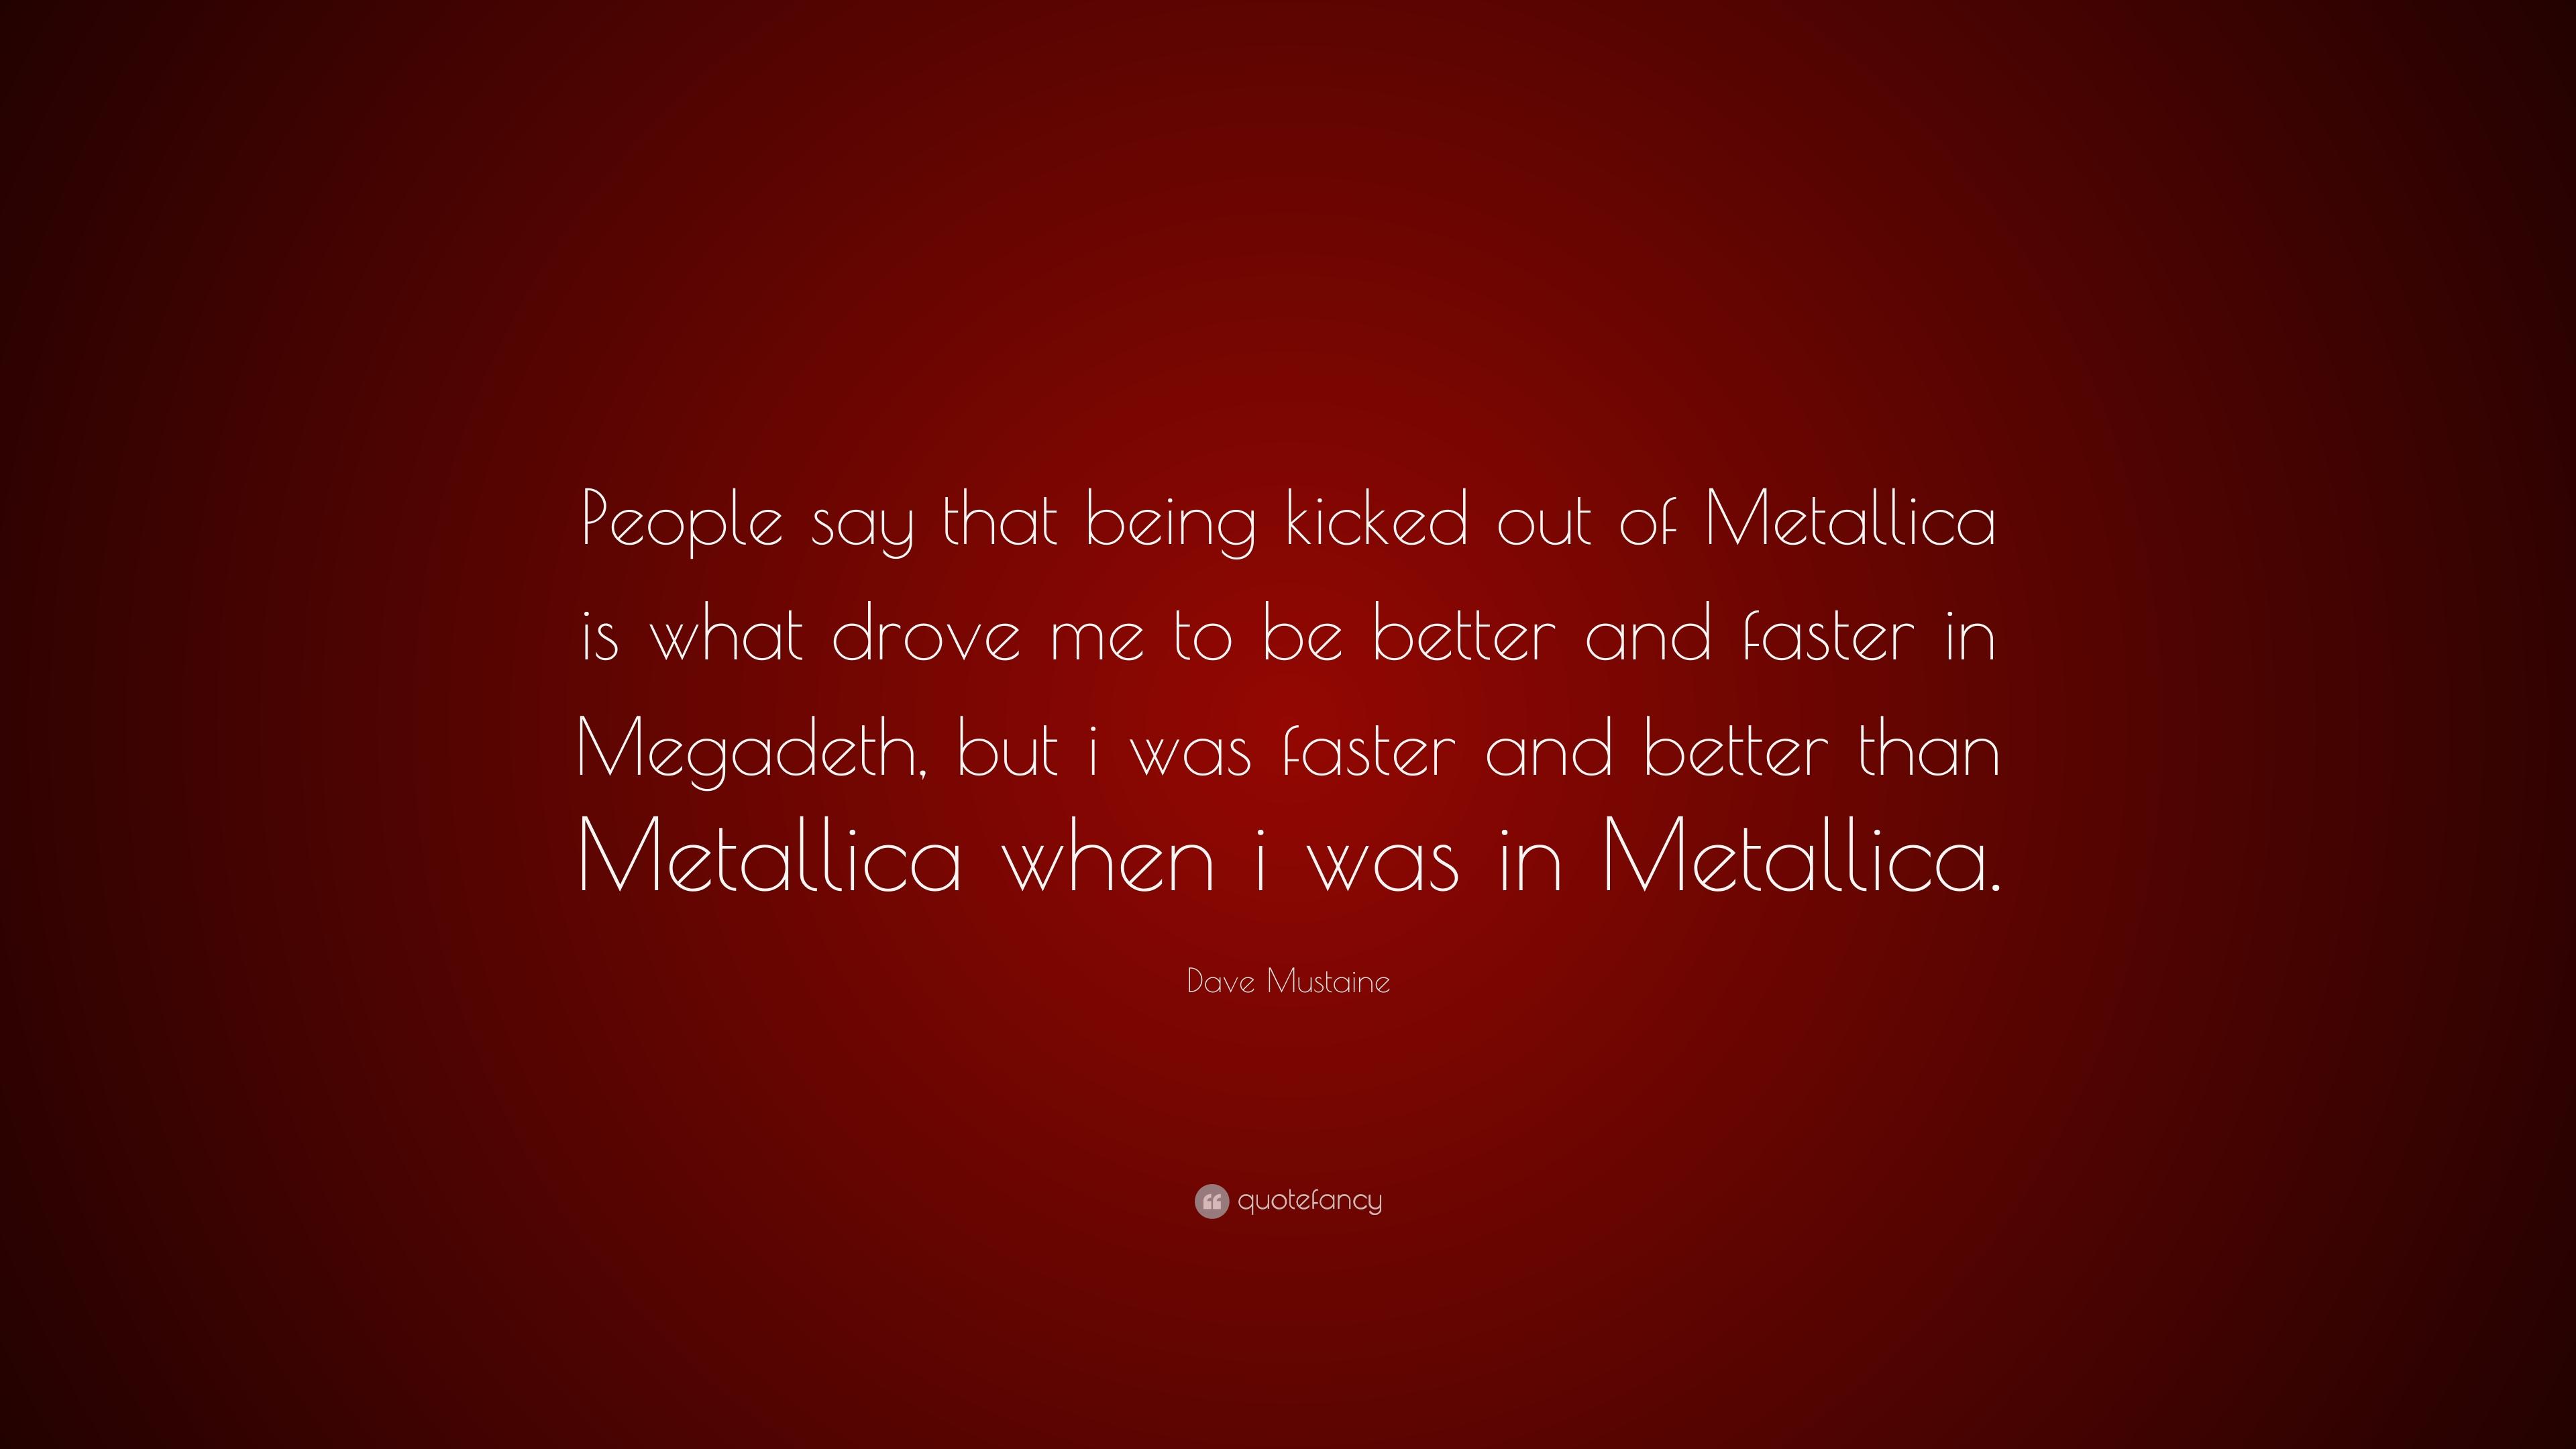 Dave Mustaine Quote: “People say that being kicked out of Metallica